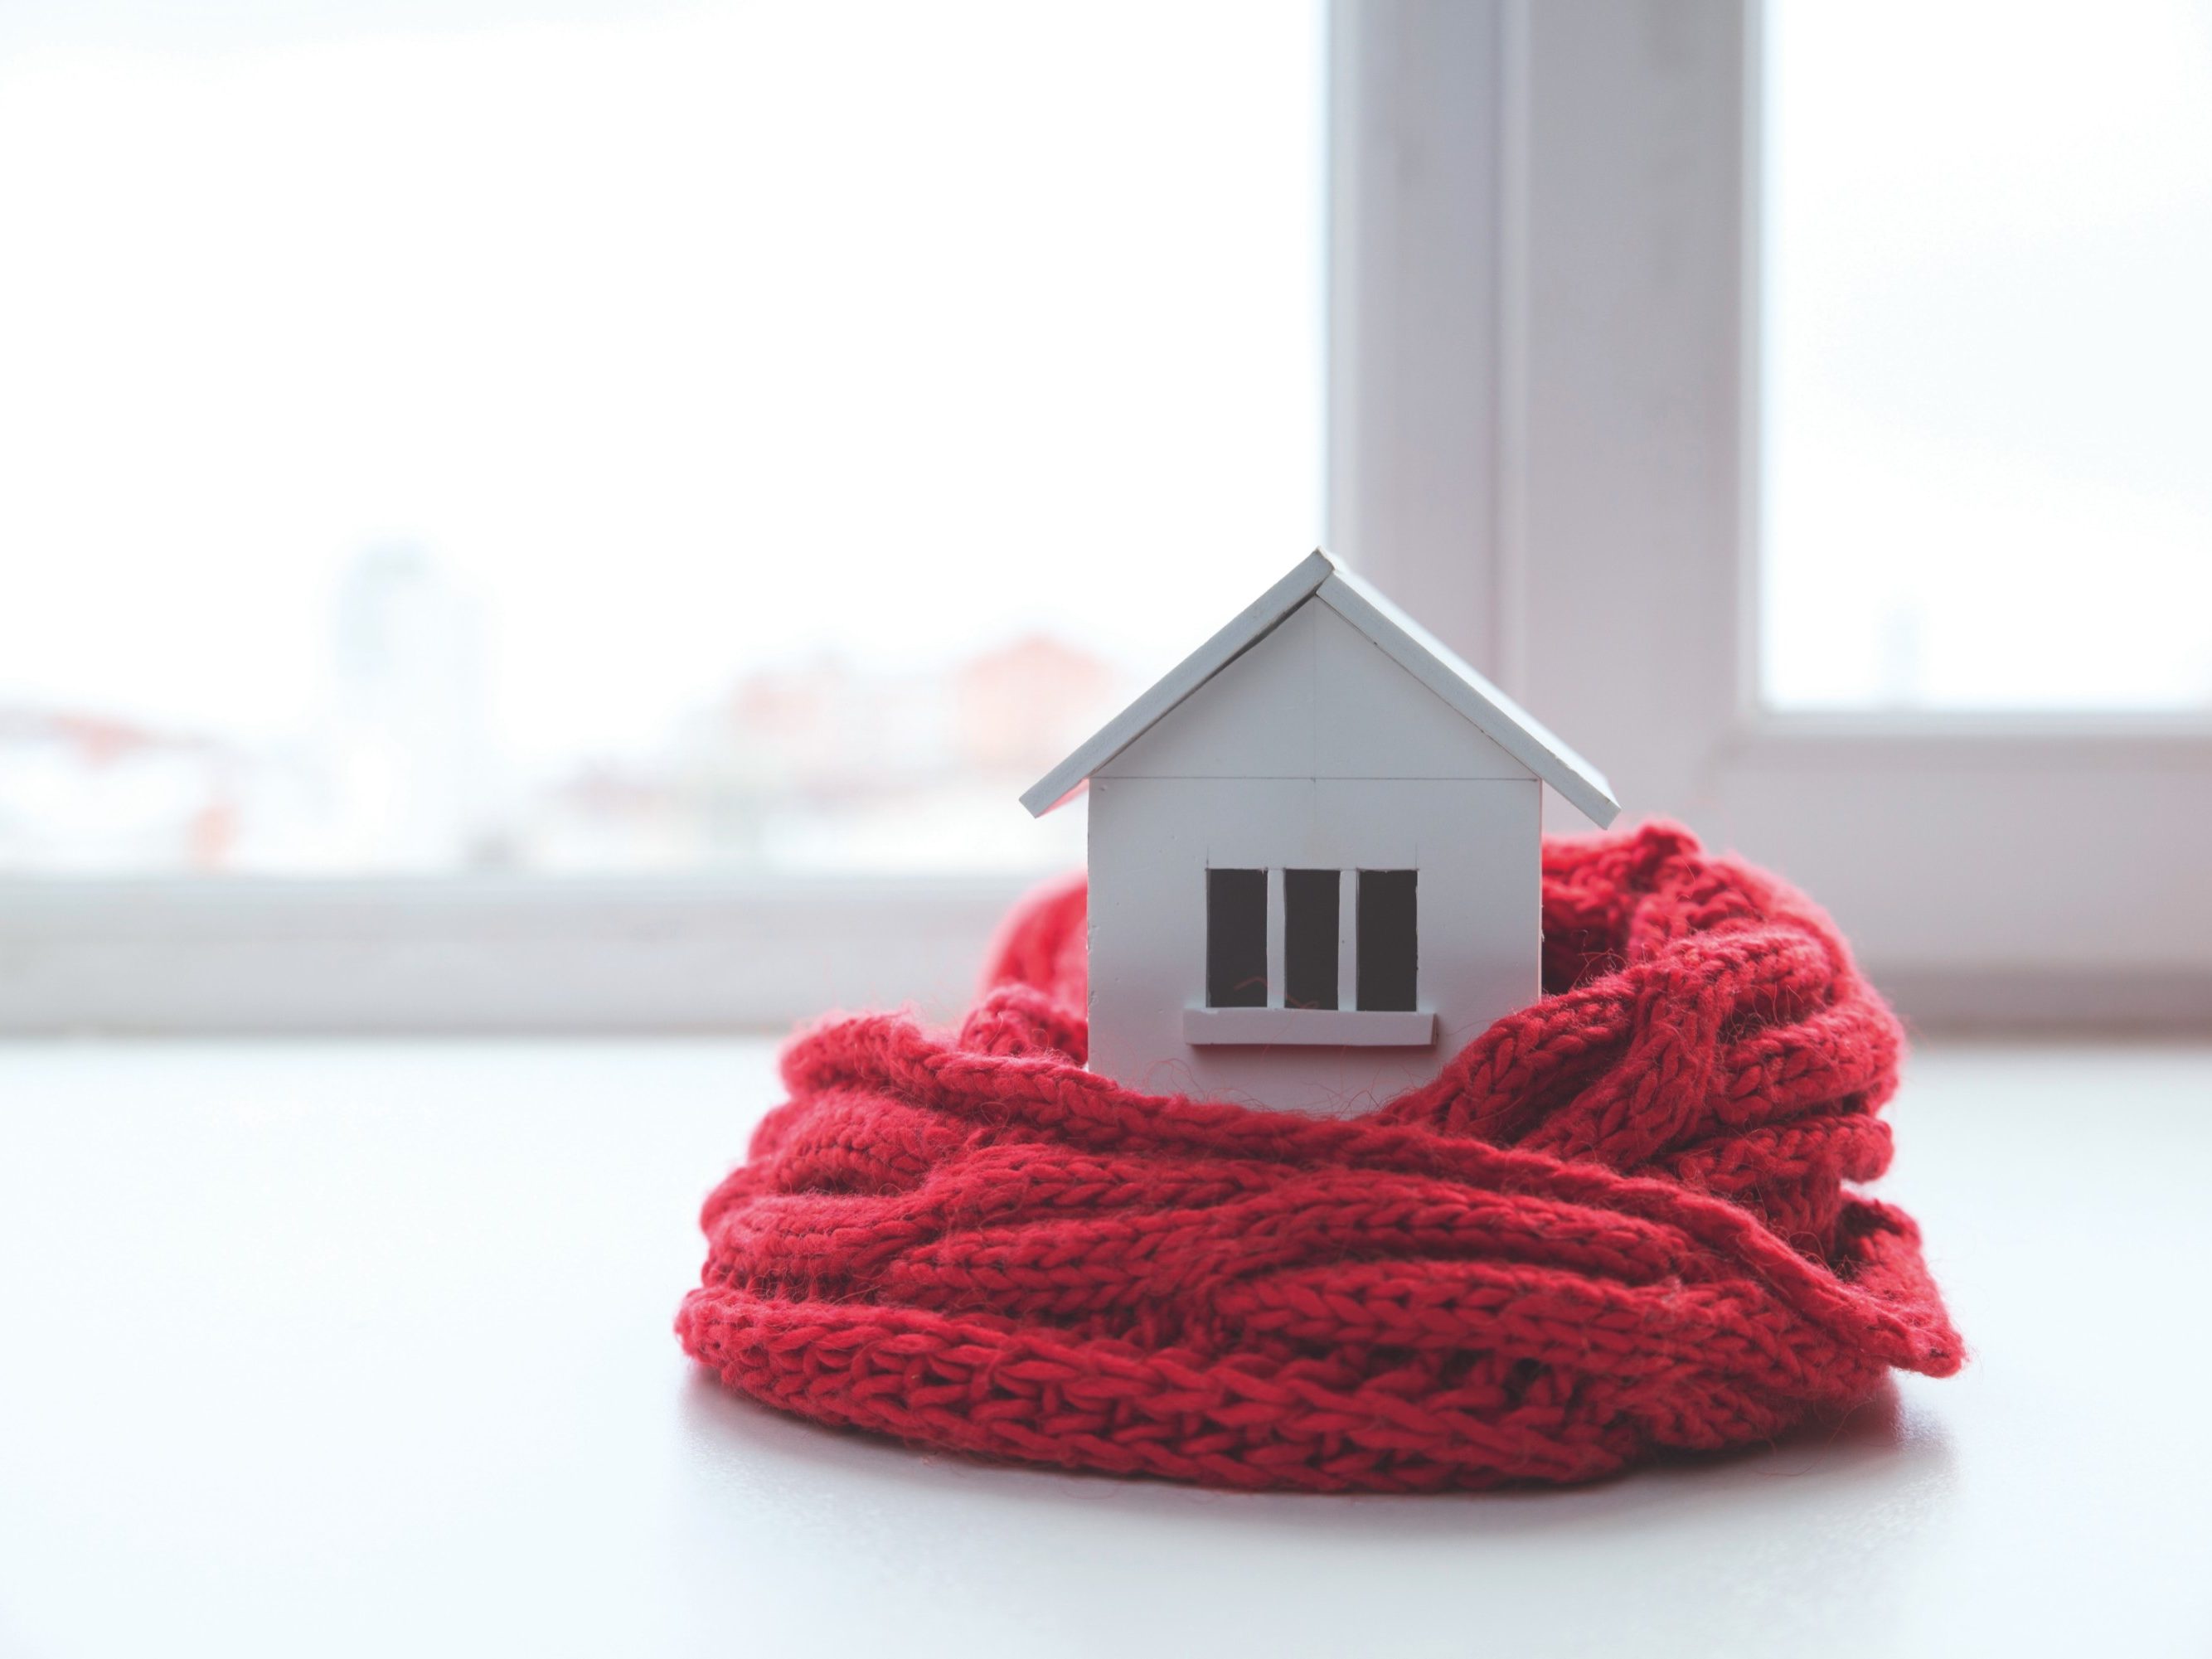 house in winter - heating system concept and cold snowy weather with model of a house wearing a knitted cap.